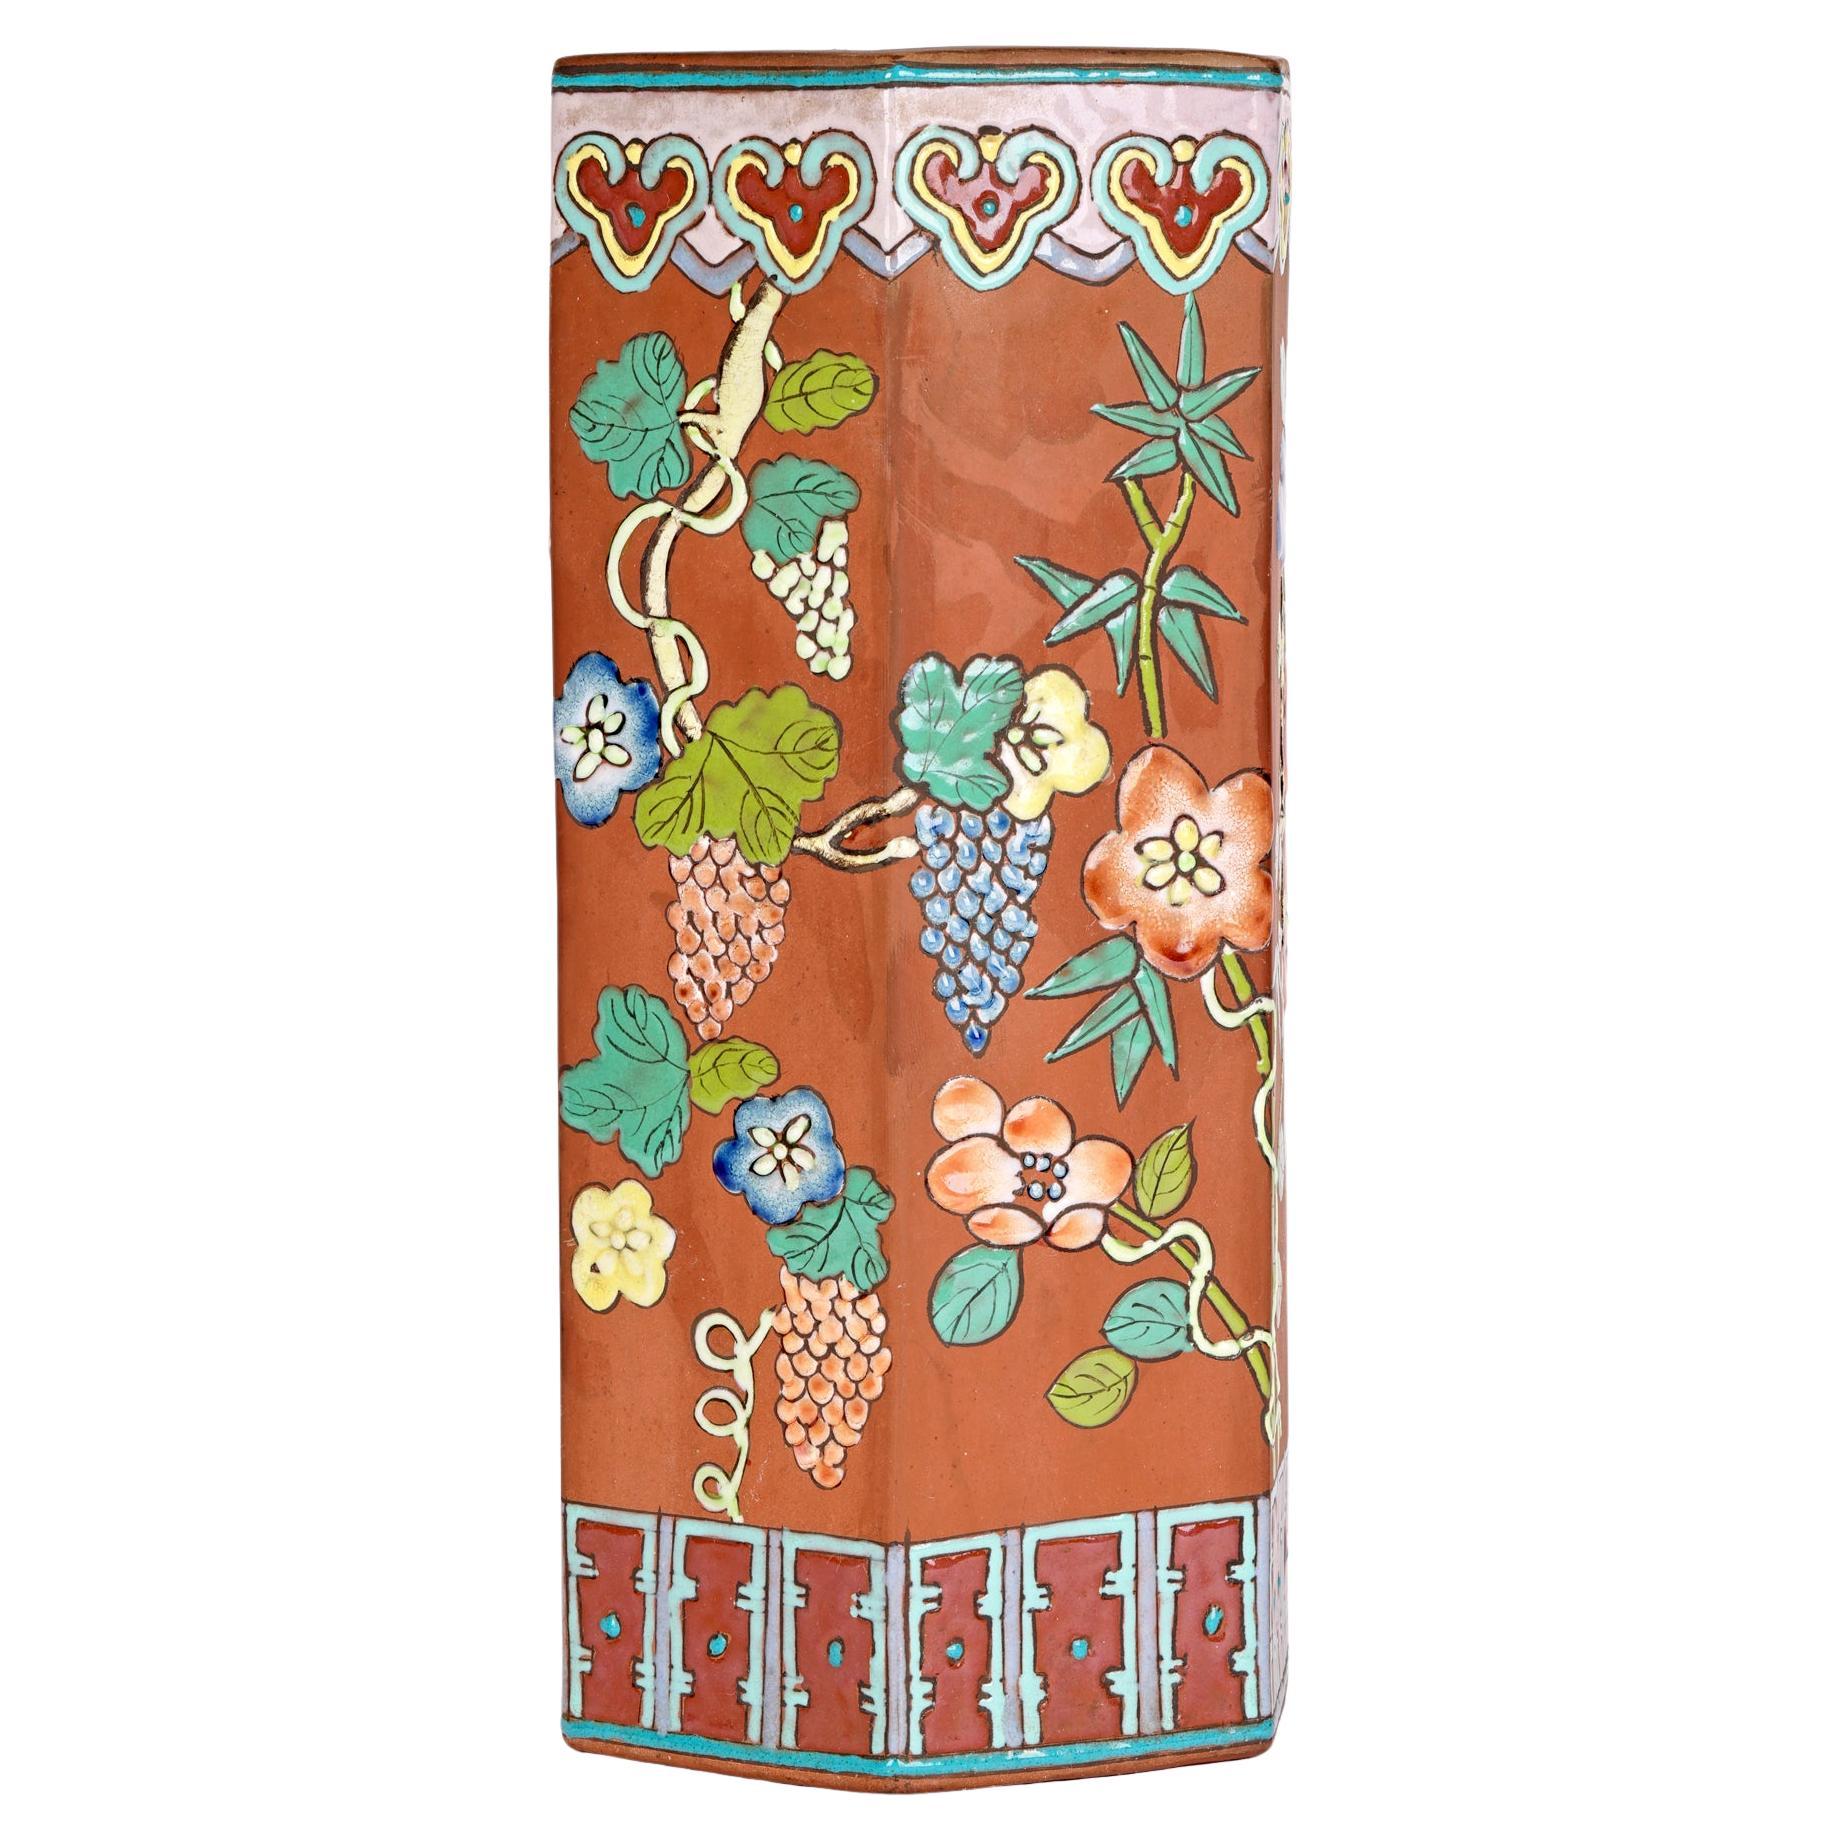 Chinese Yixing Hexagonal Vase with Painted Floral & Vine Designs For Sale